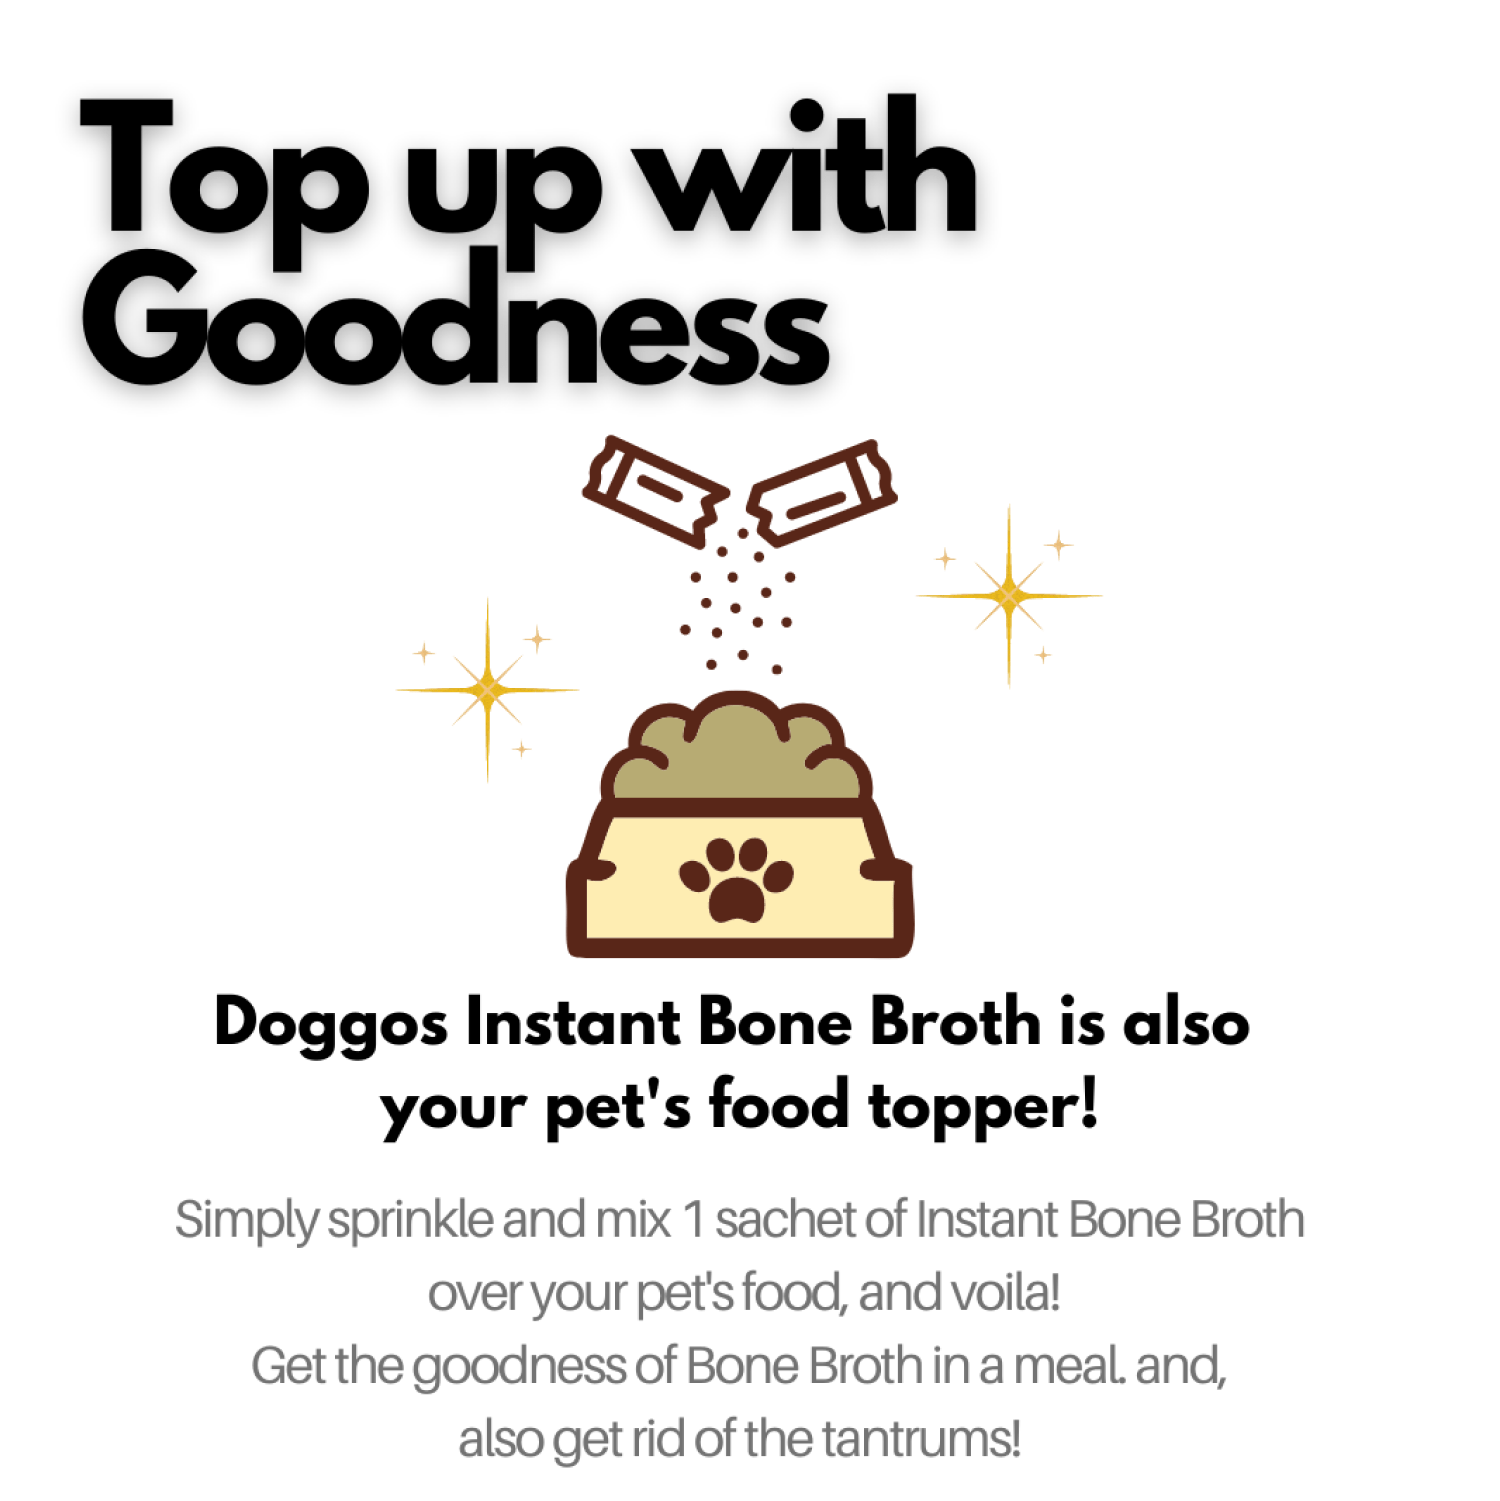 Doggos Broth Broth Every where for Dogs and Cats (4 Flavours)